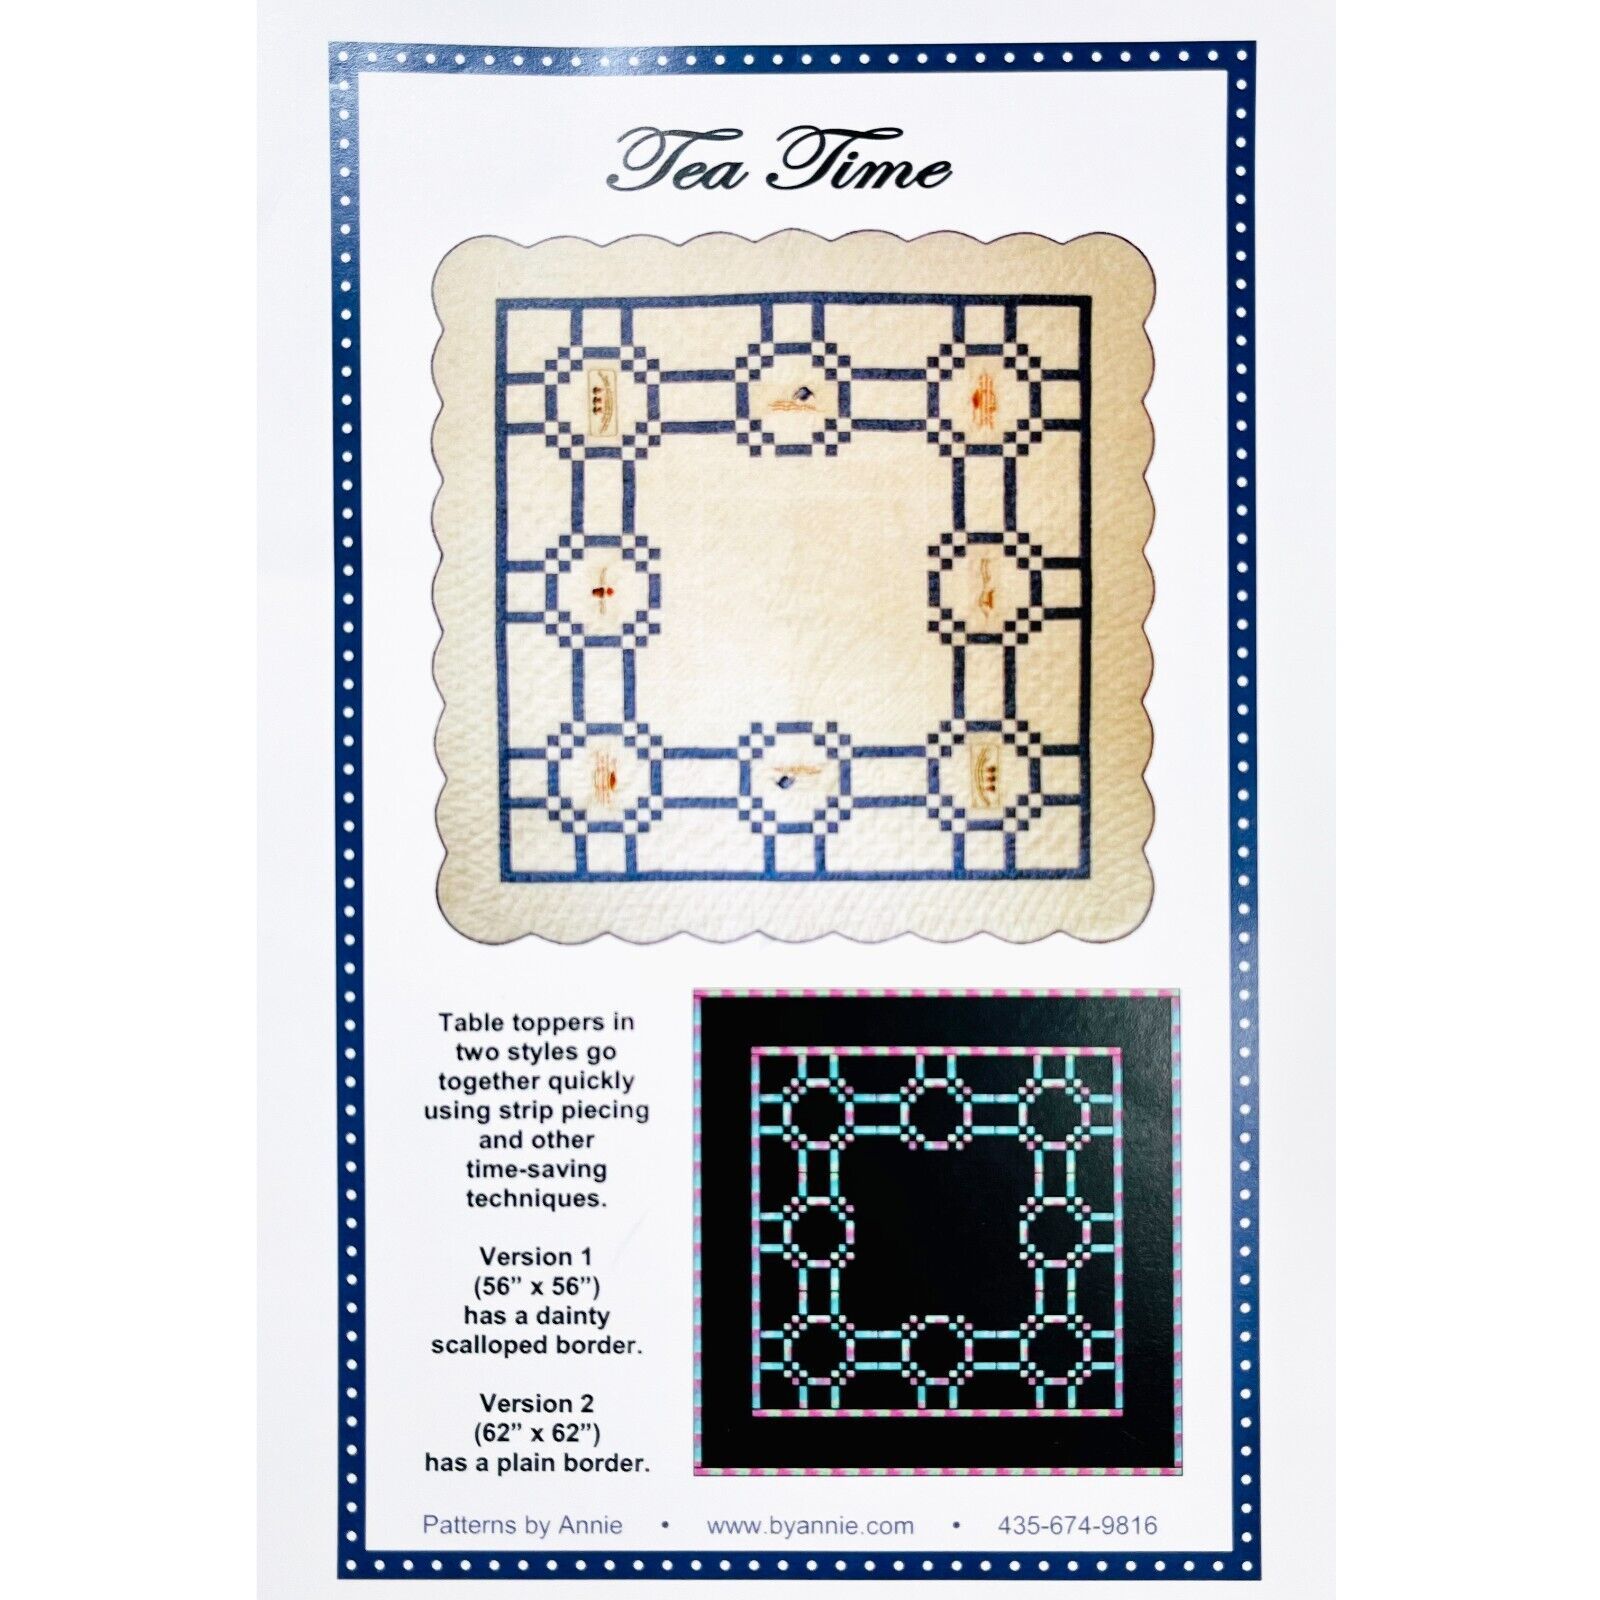 Table Topper Quilt Pattern Tea Time Table Toppers in 2 Styles Patterns by Annie - $7.99